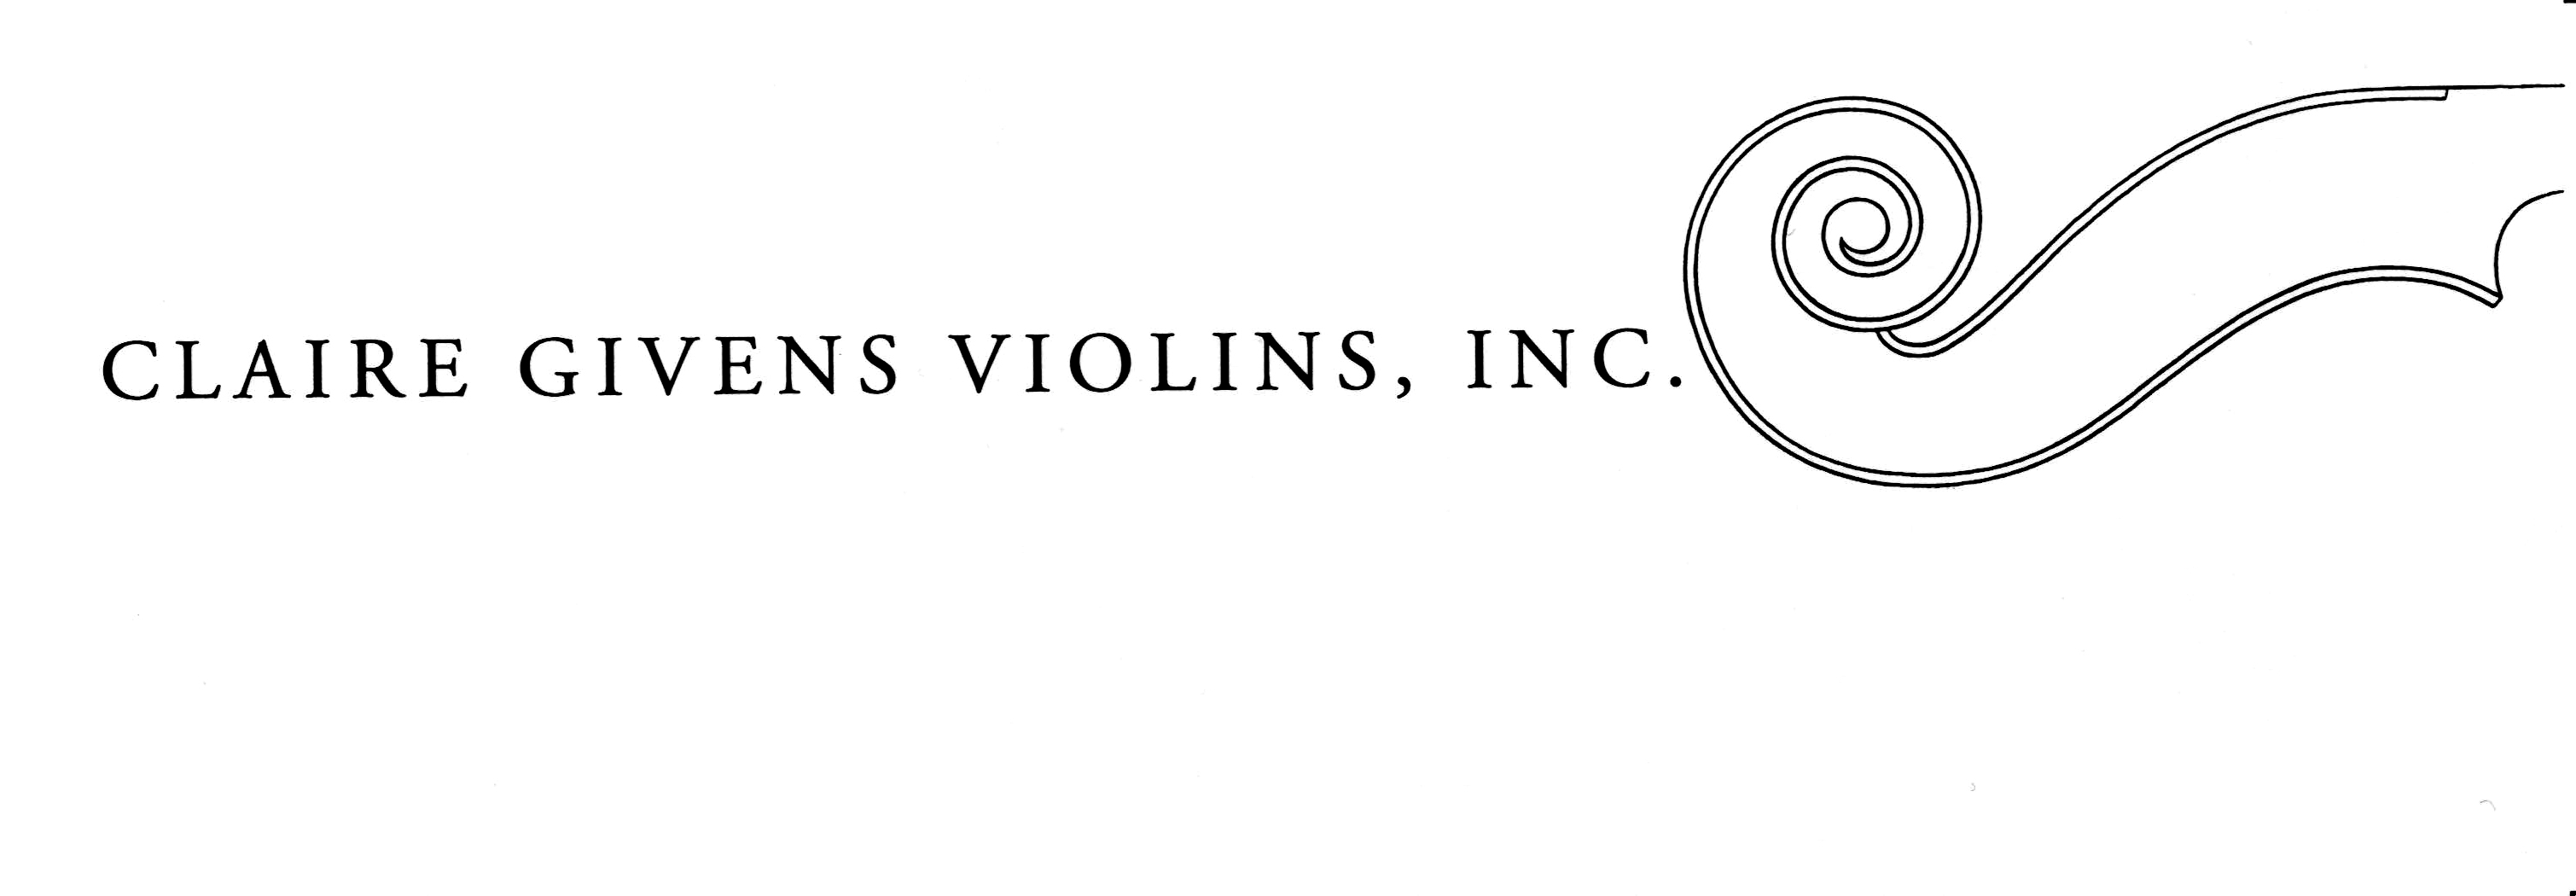 Claire Givens Violins, Inc.